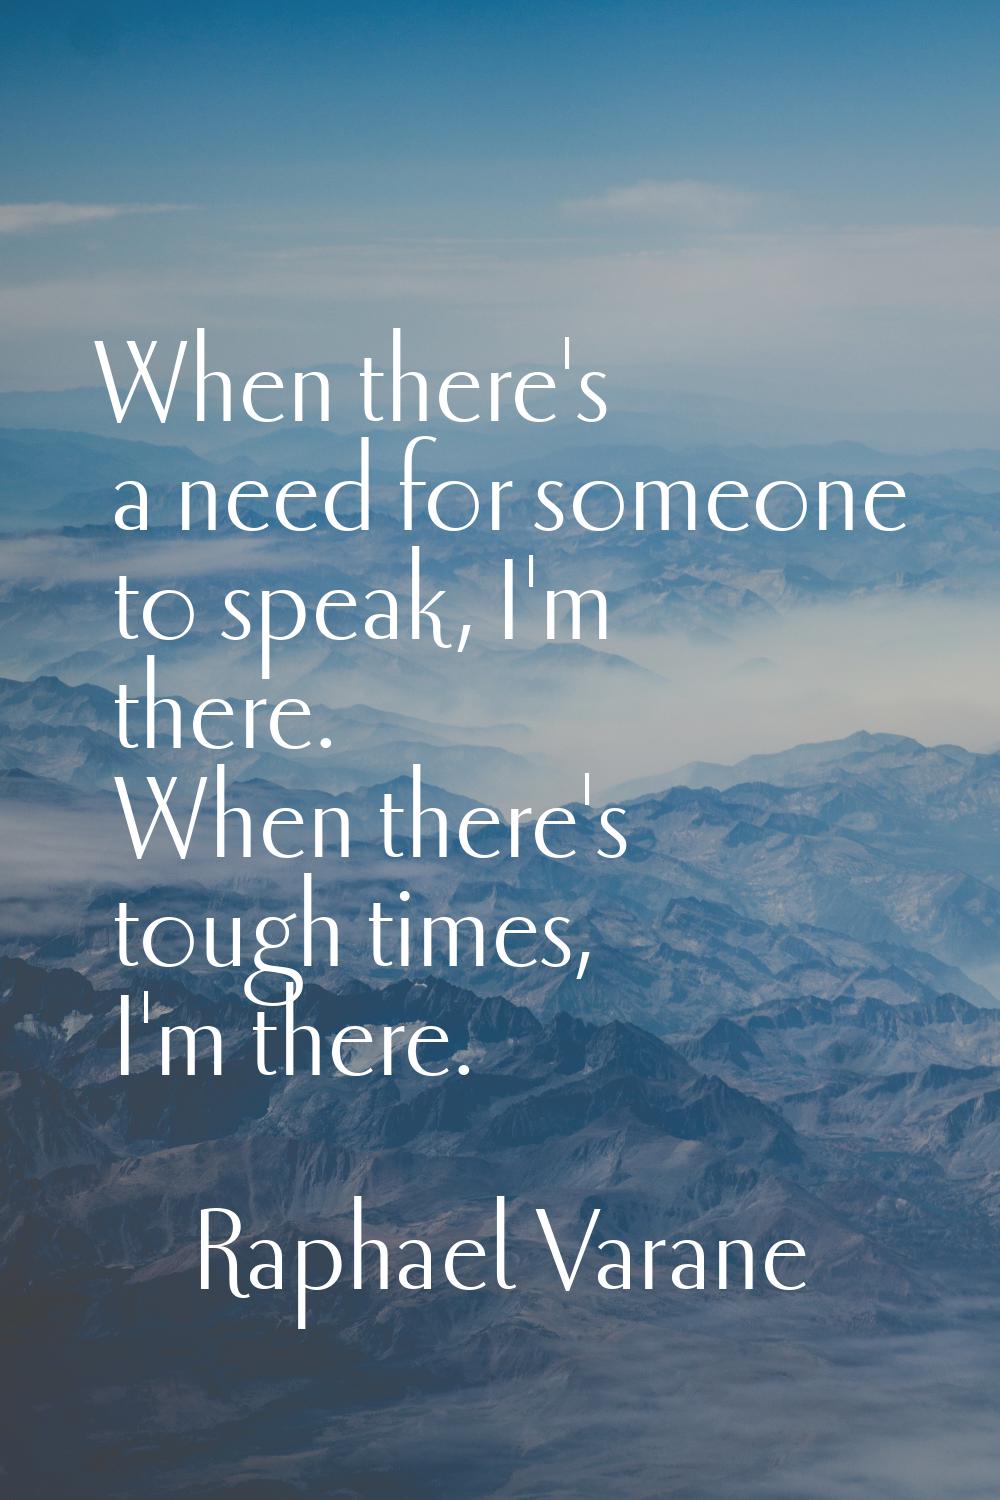 When there's a need for someone to speak, I'm there. When there's tough times, I'm there.